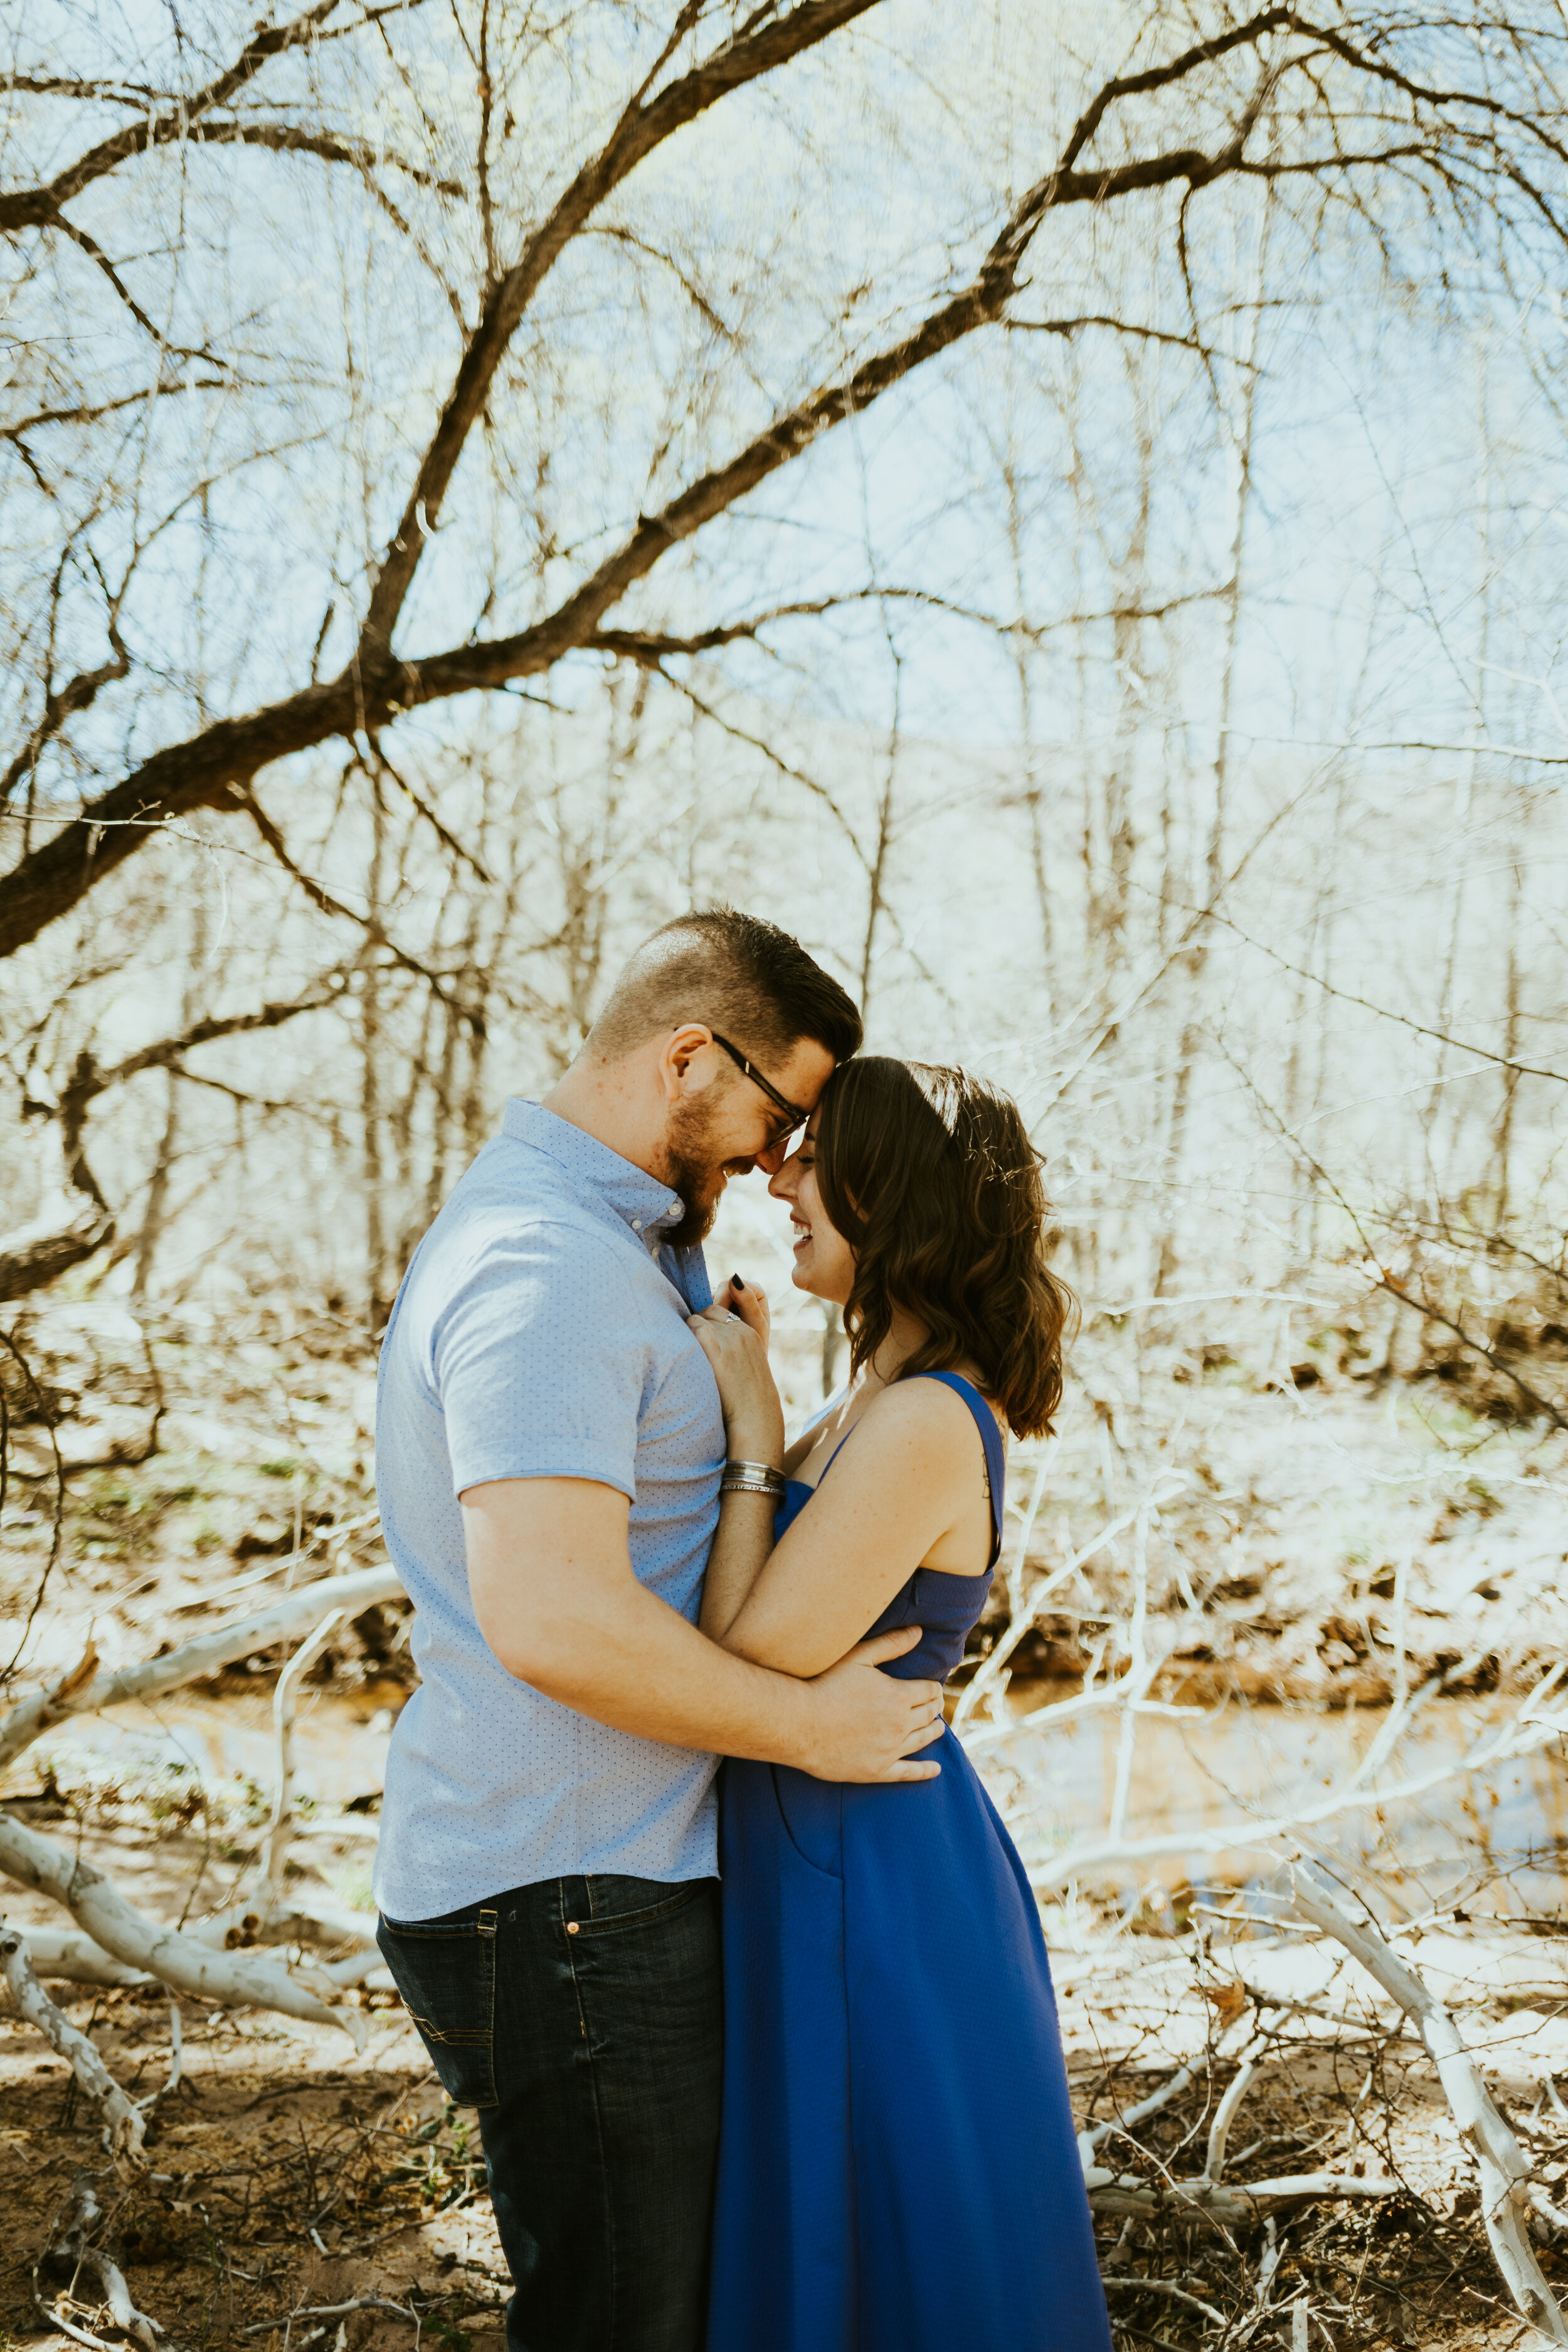 red rock crossing sedona arizona cathedral rock crescent moon ranch couple photos engagement photo outfit inspiration couple posing ideas midday photos-2.jpg